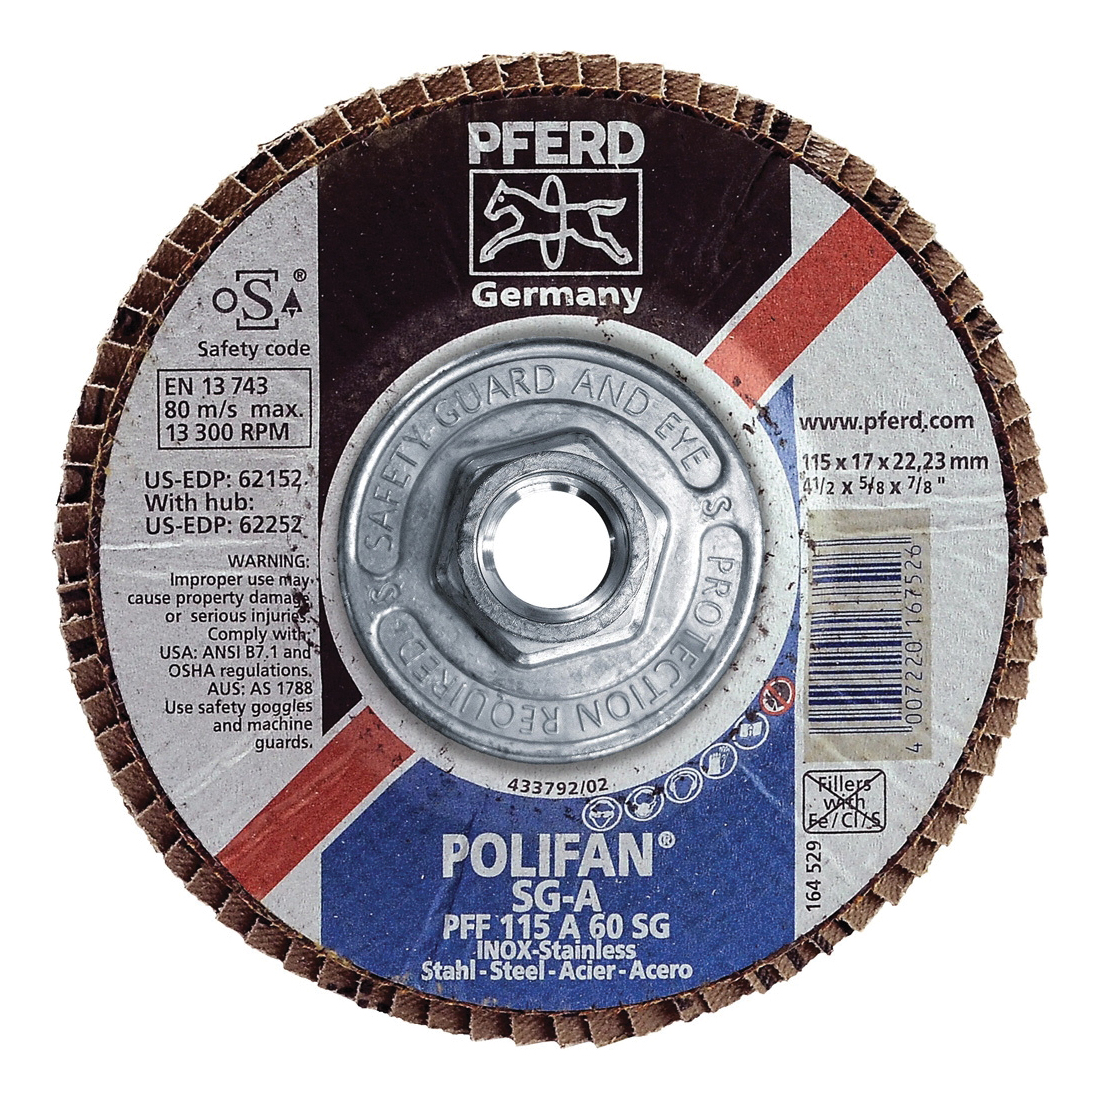 PFERD Polifan® 62252 Performance Line SG A Threaded Coated Abrasive Flap Disc, 4-1/2 in Dia, 60 Grit, Aluminum Oxide Abrasive, Type 27 Flat Disc